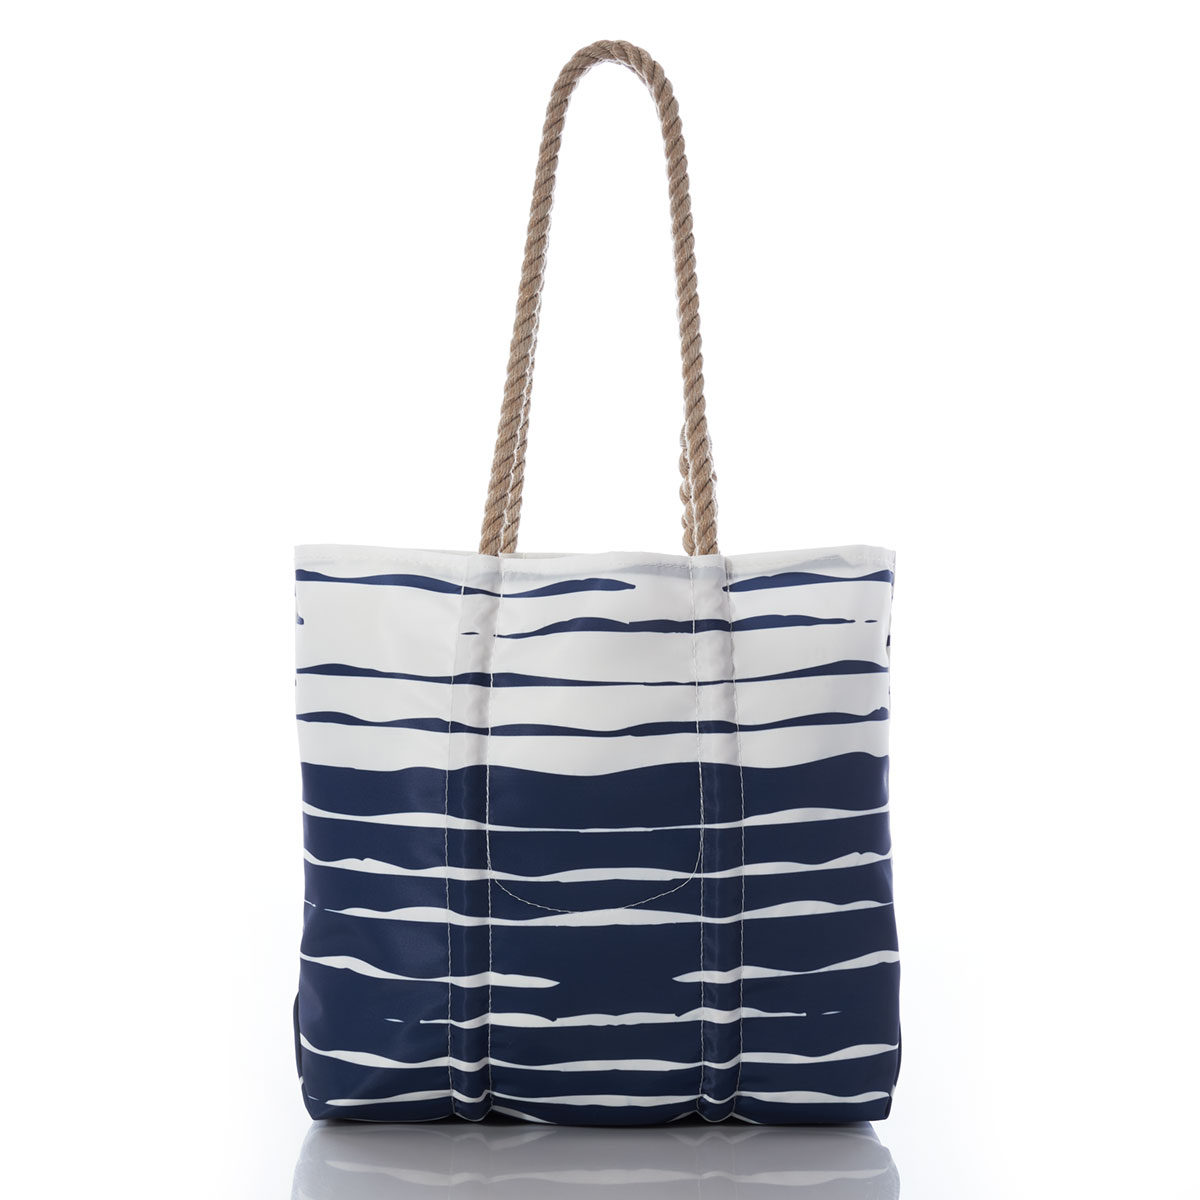 The Week-End Tote bag is fashioned from Monogram Washed Denim